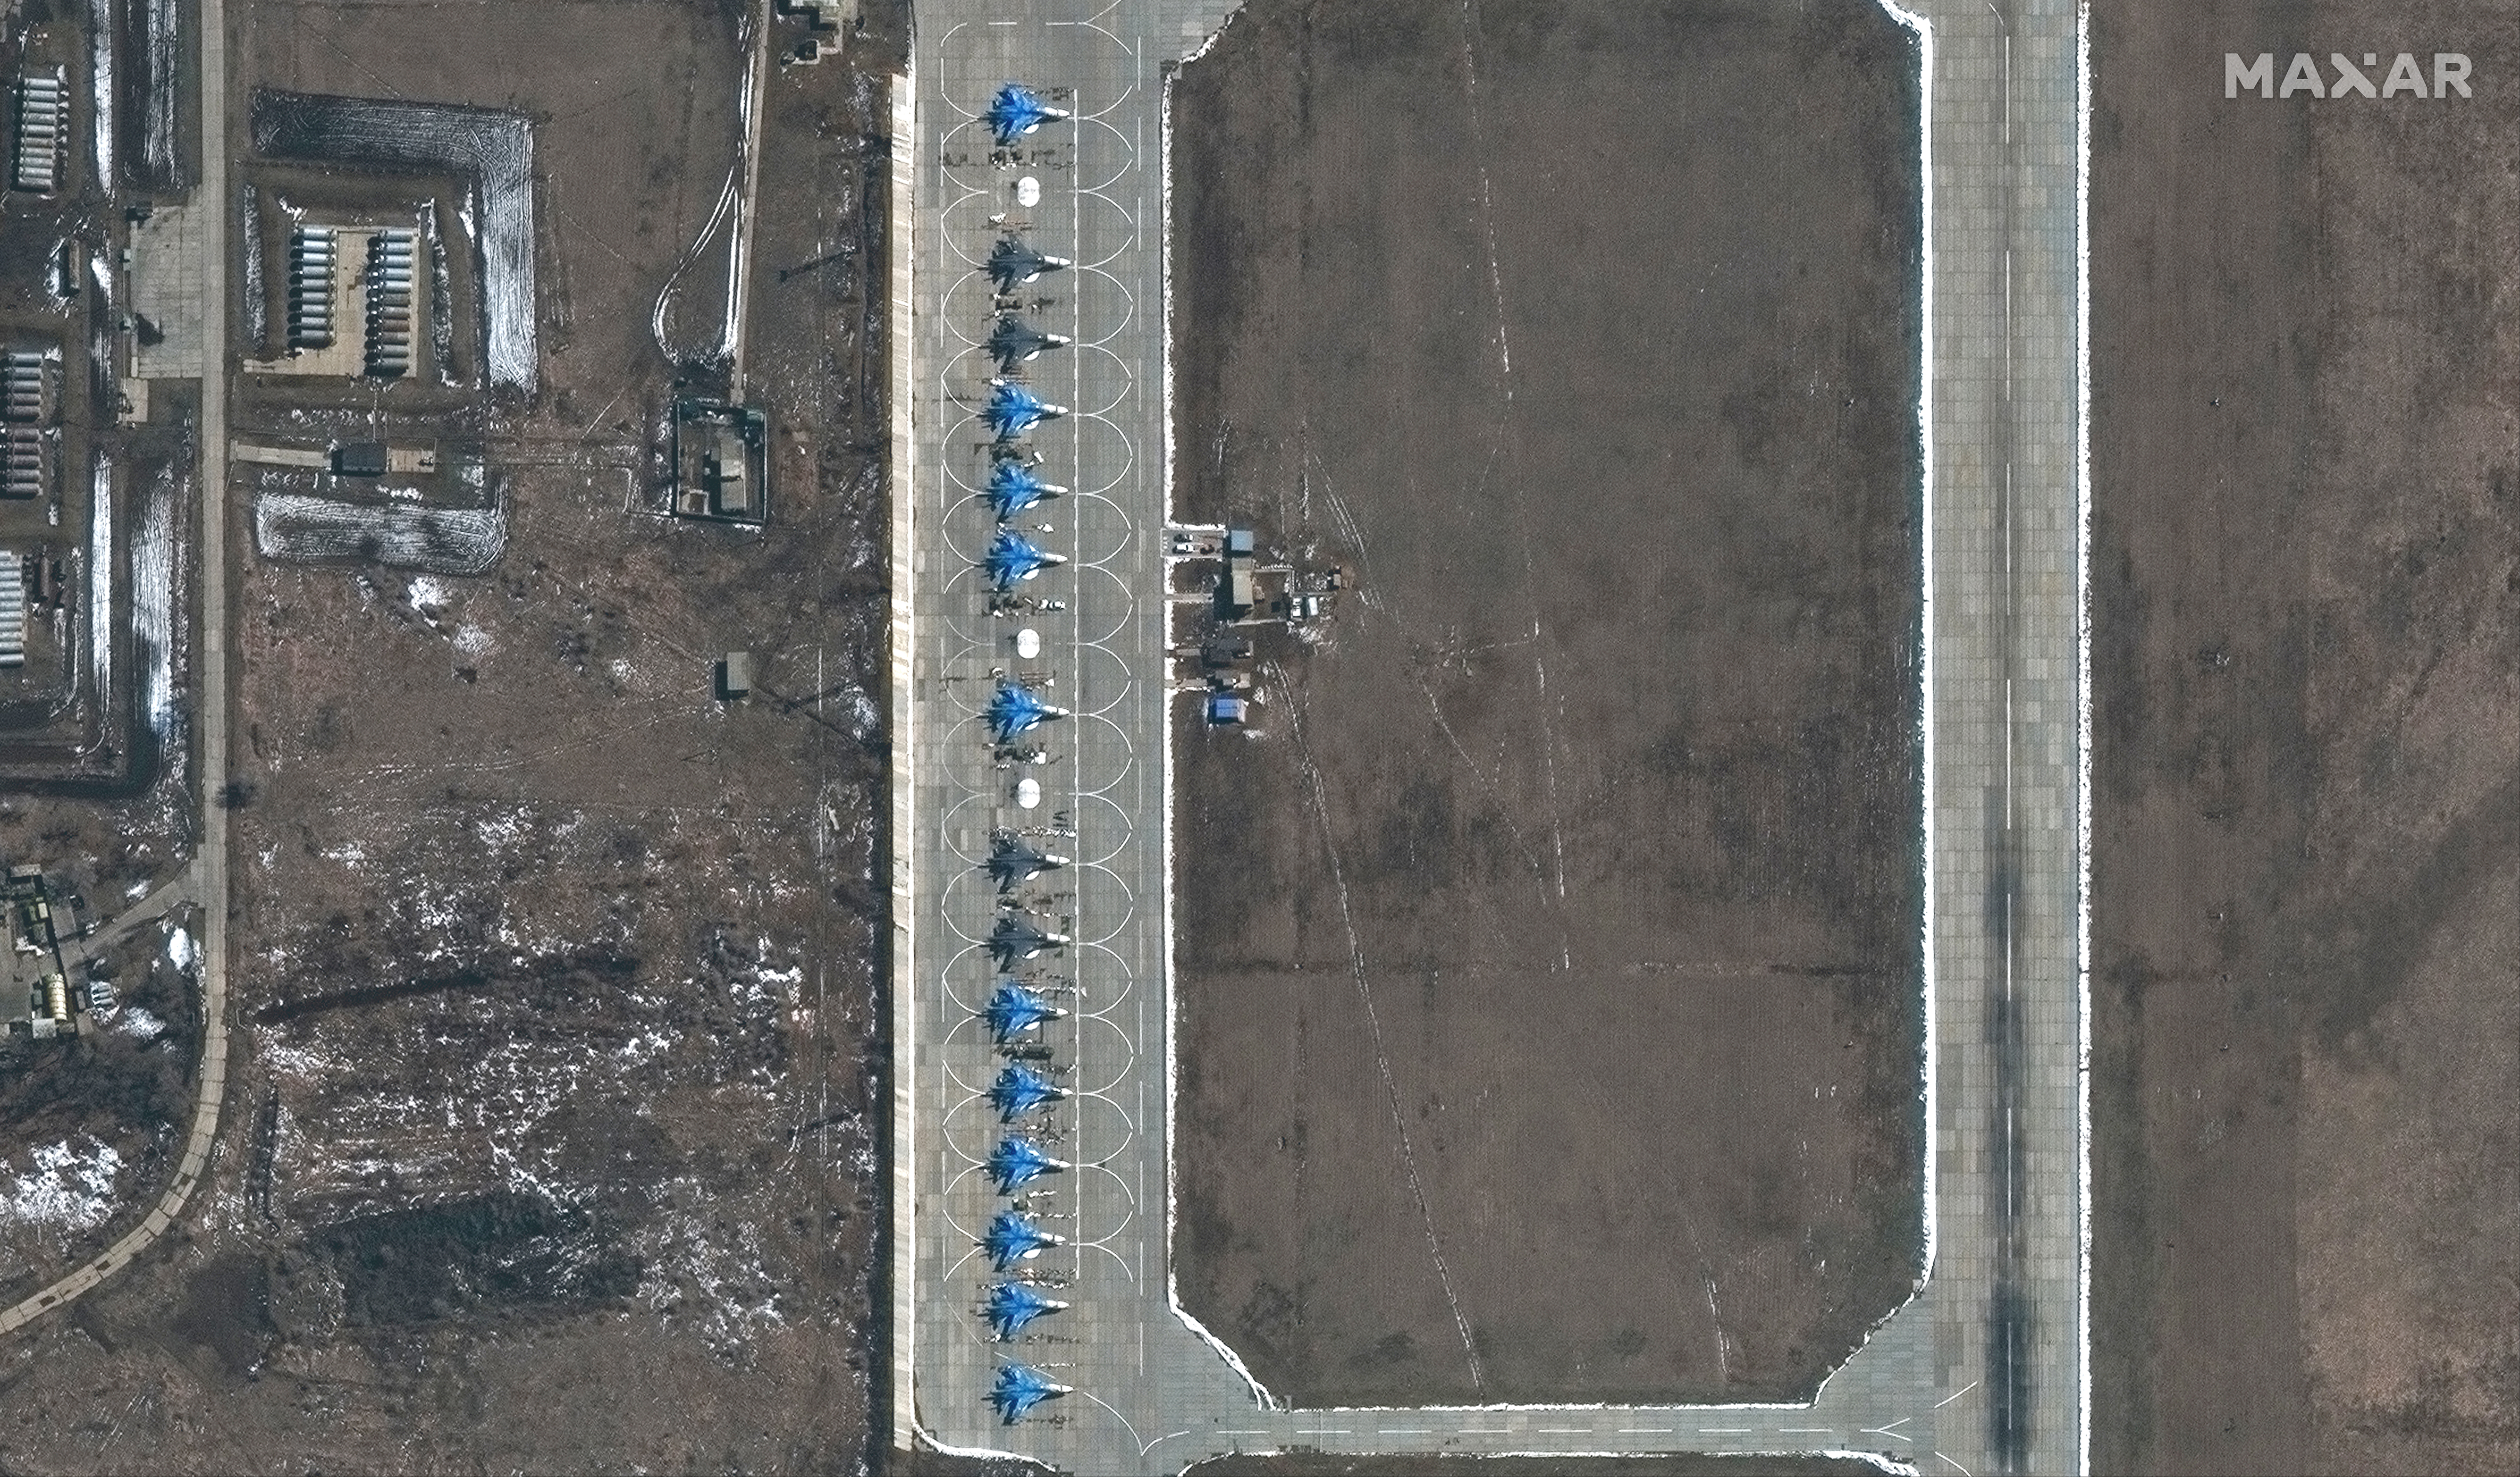 Eleven SU-34 aircraft at the Morozovsk airbase in Russia